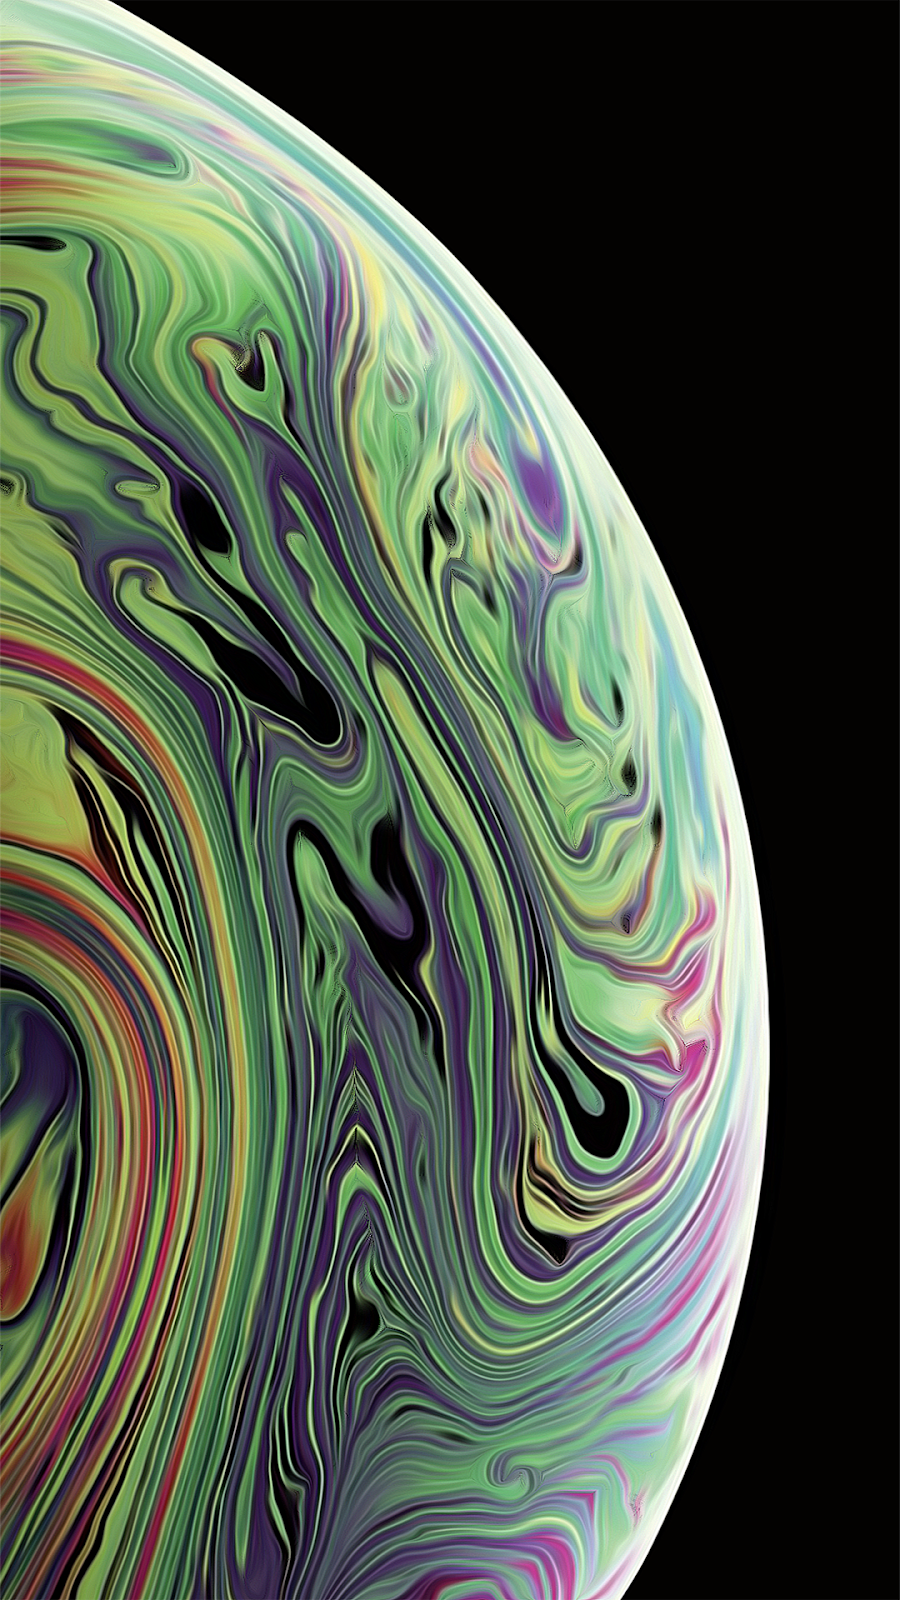 Ten Taboos About Iphone Xs Max Wallpaper 8k You Should Never Share